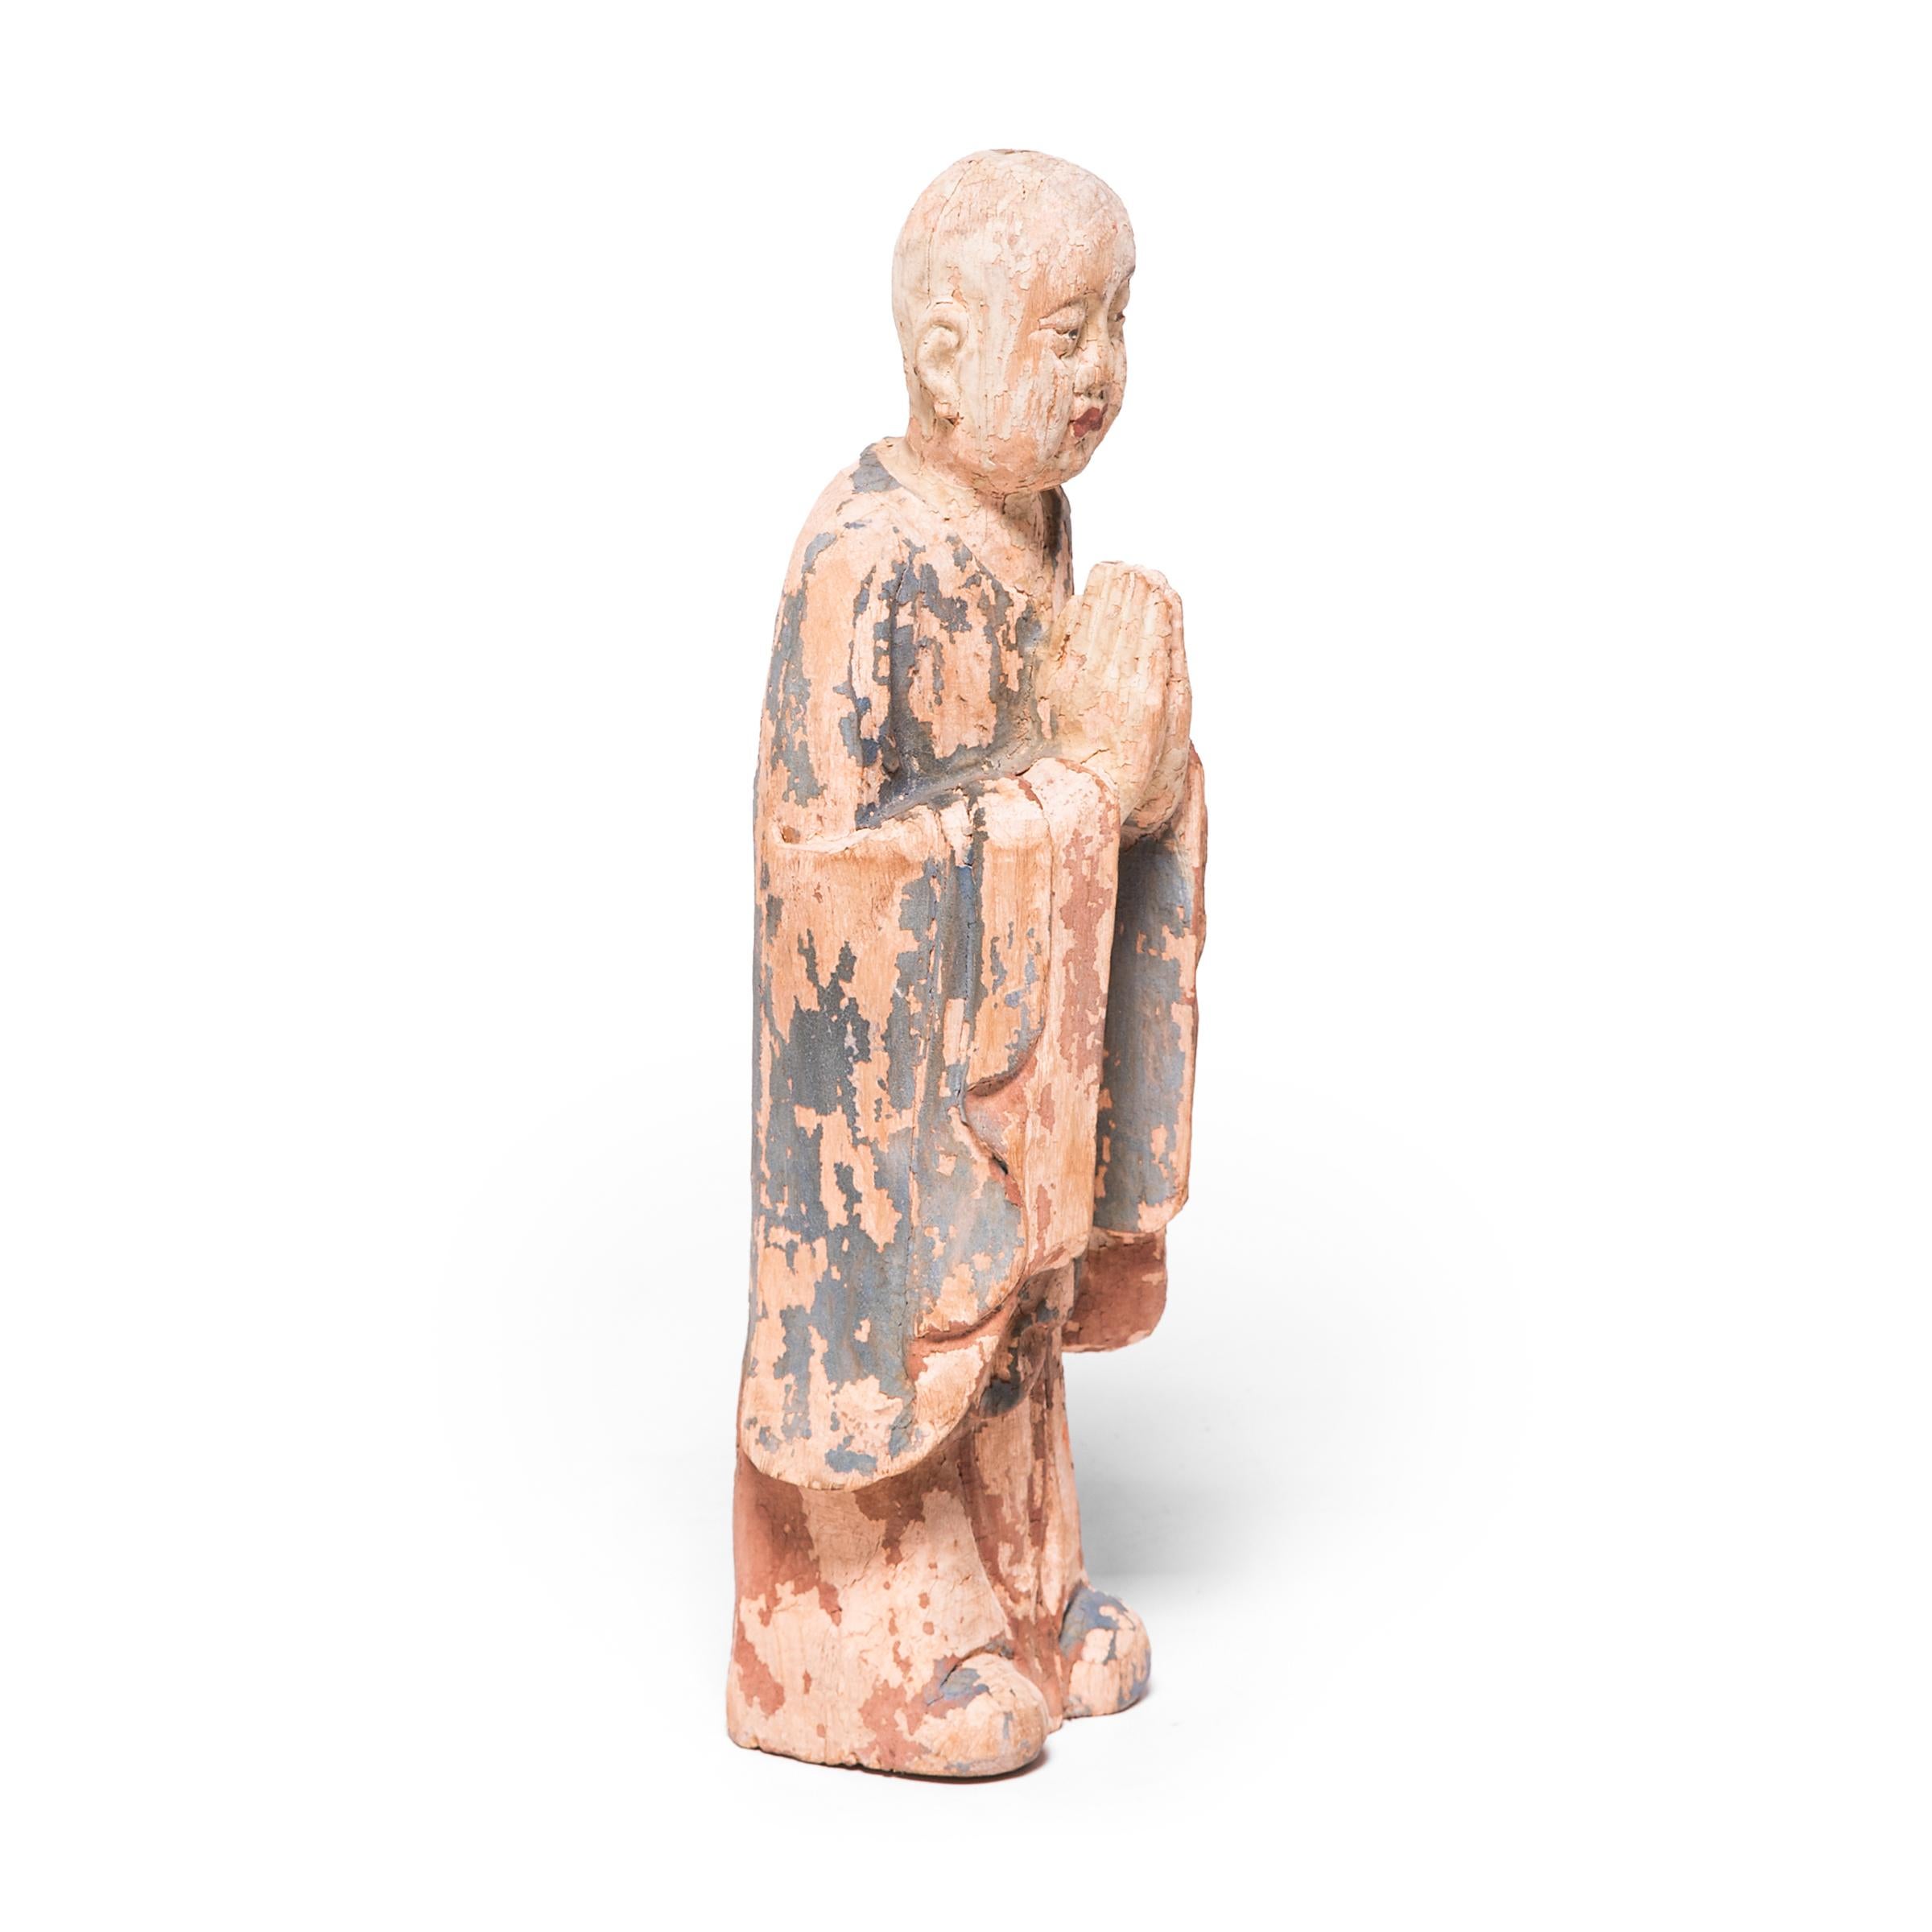 Polychromed 17th Century Chinese Standing Figure of a Buddhist Monk